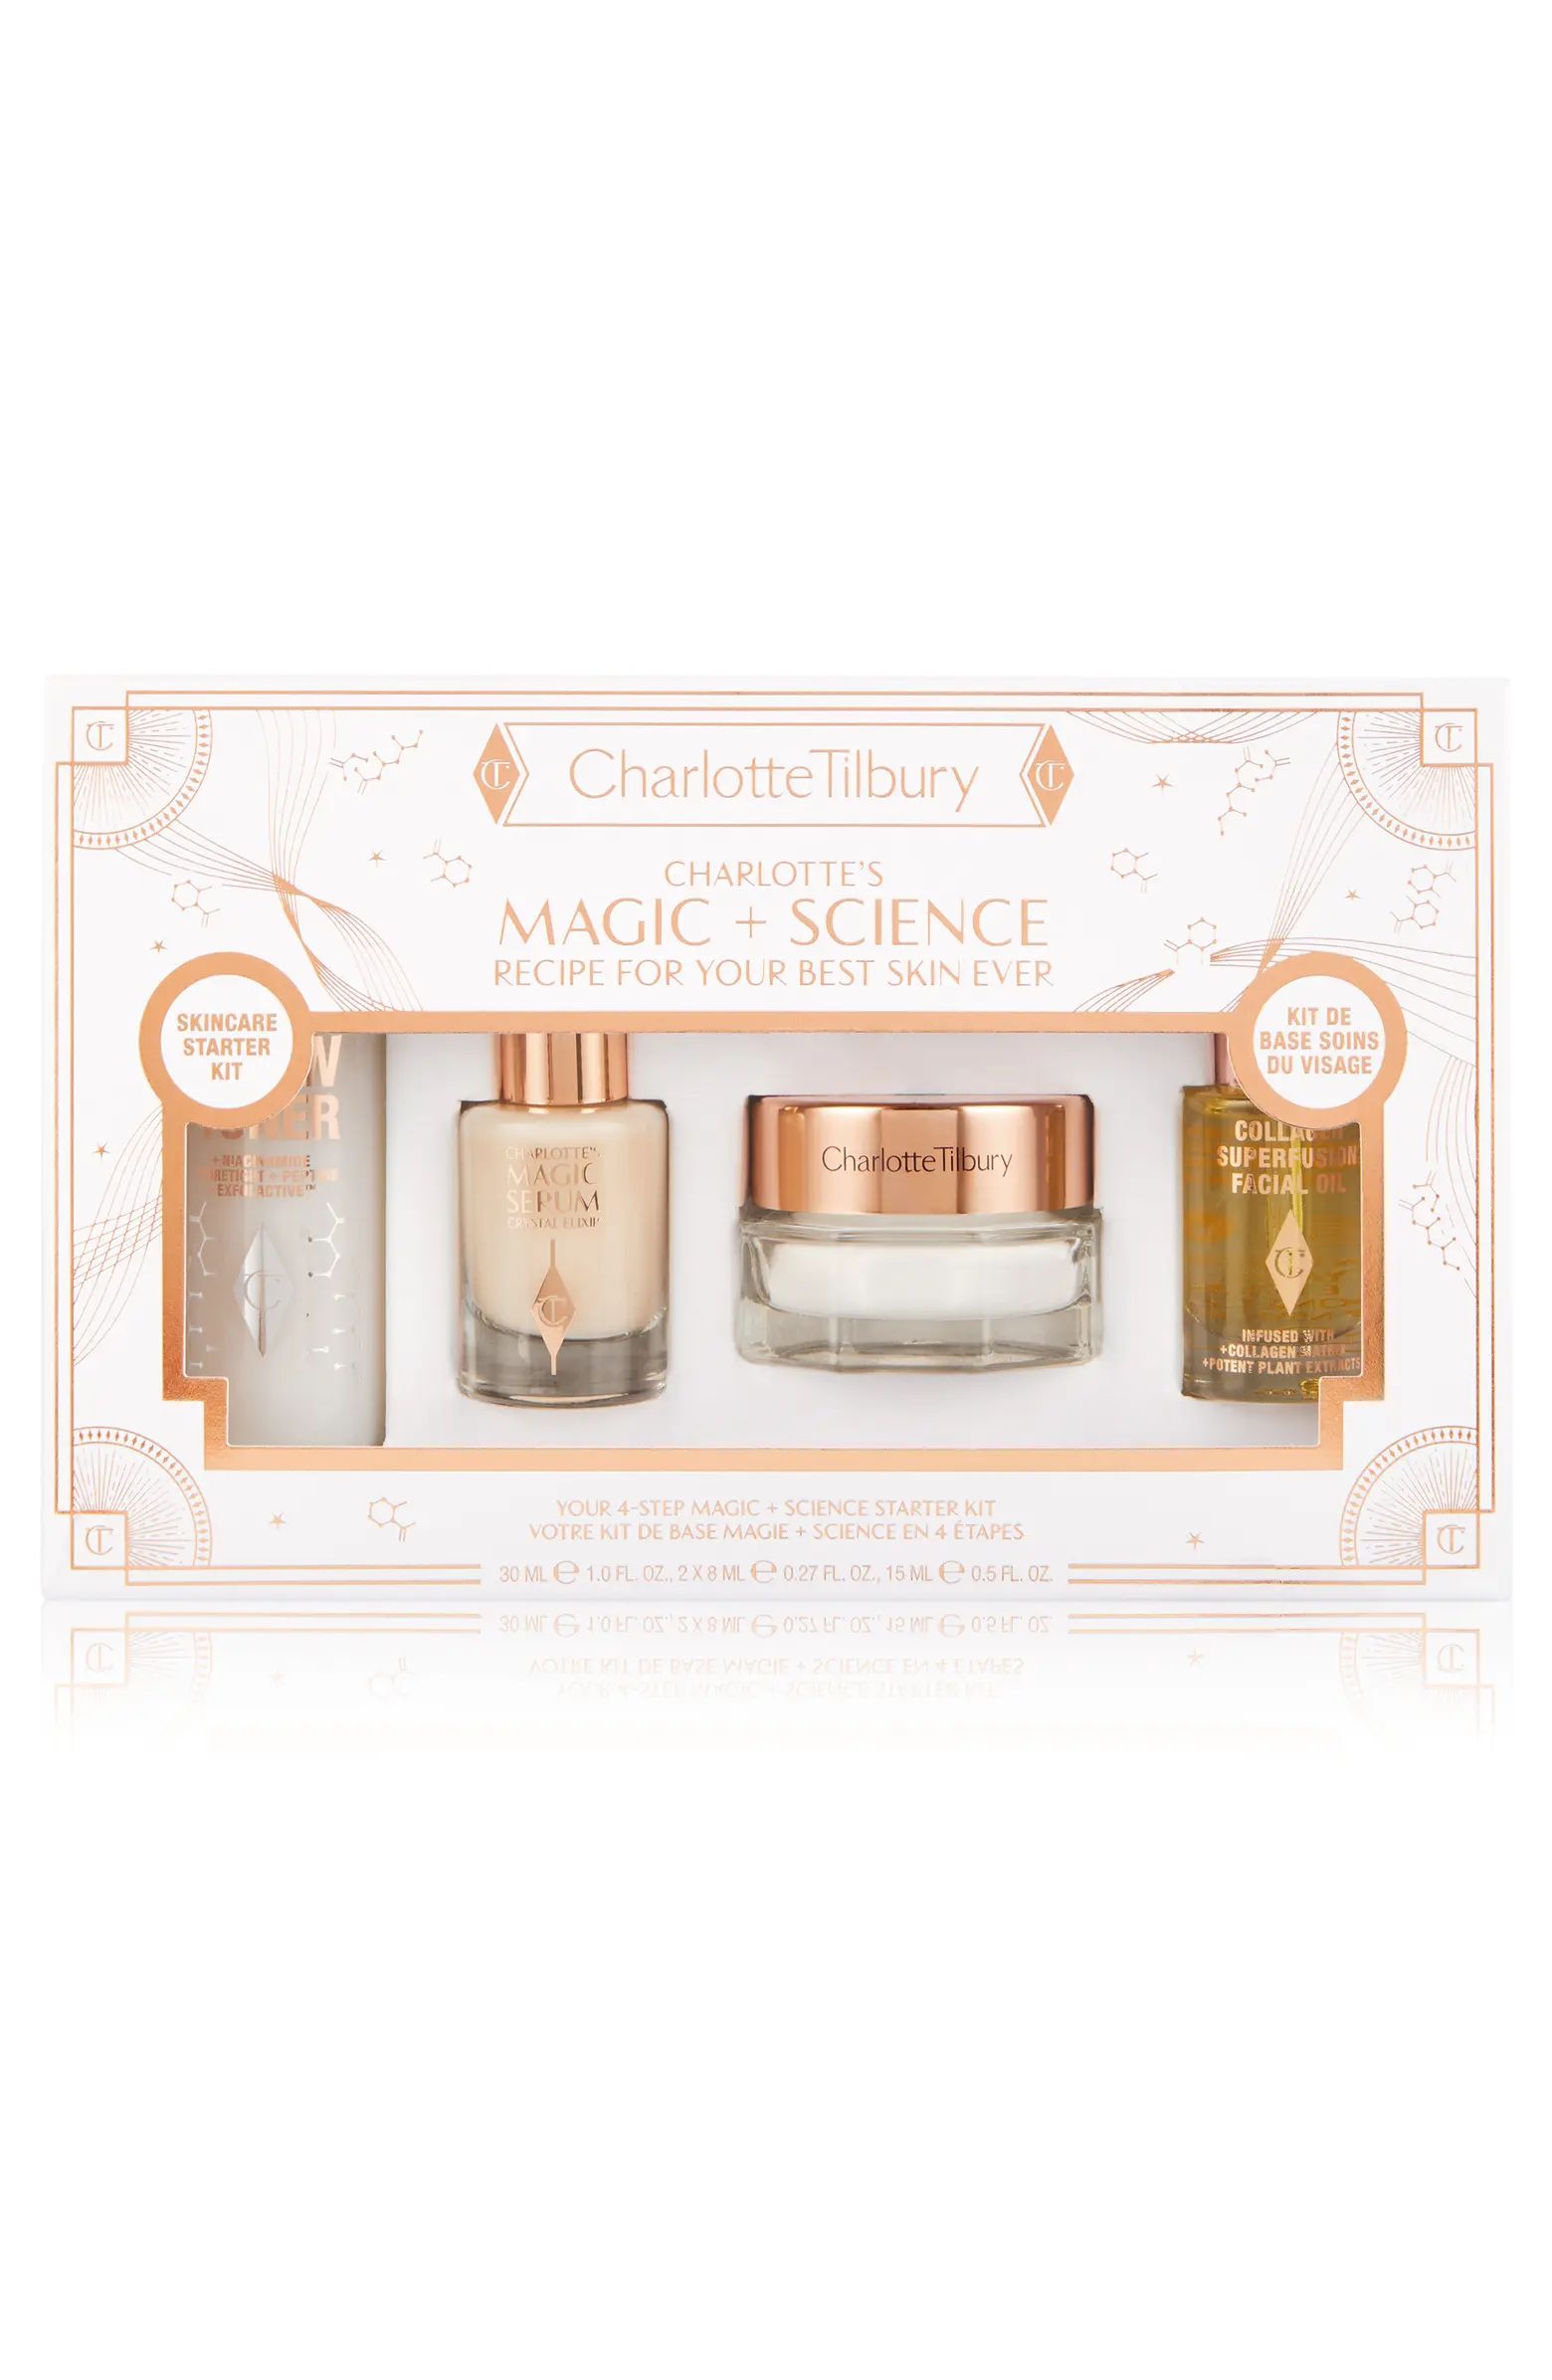 Charlotte's Magic + Science Recipe for Your Best Skin Ever Set (Limited Edition) $109 Value | Nordstrom